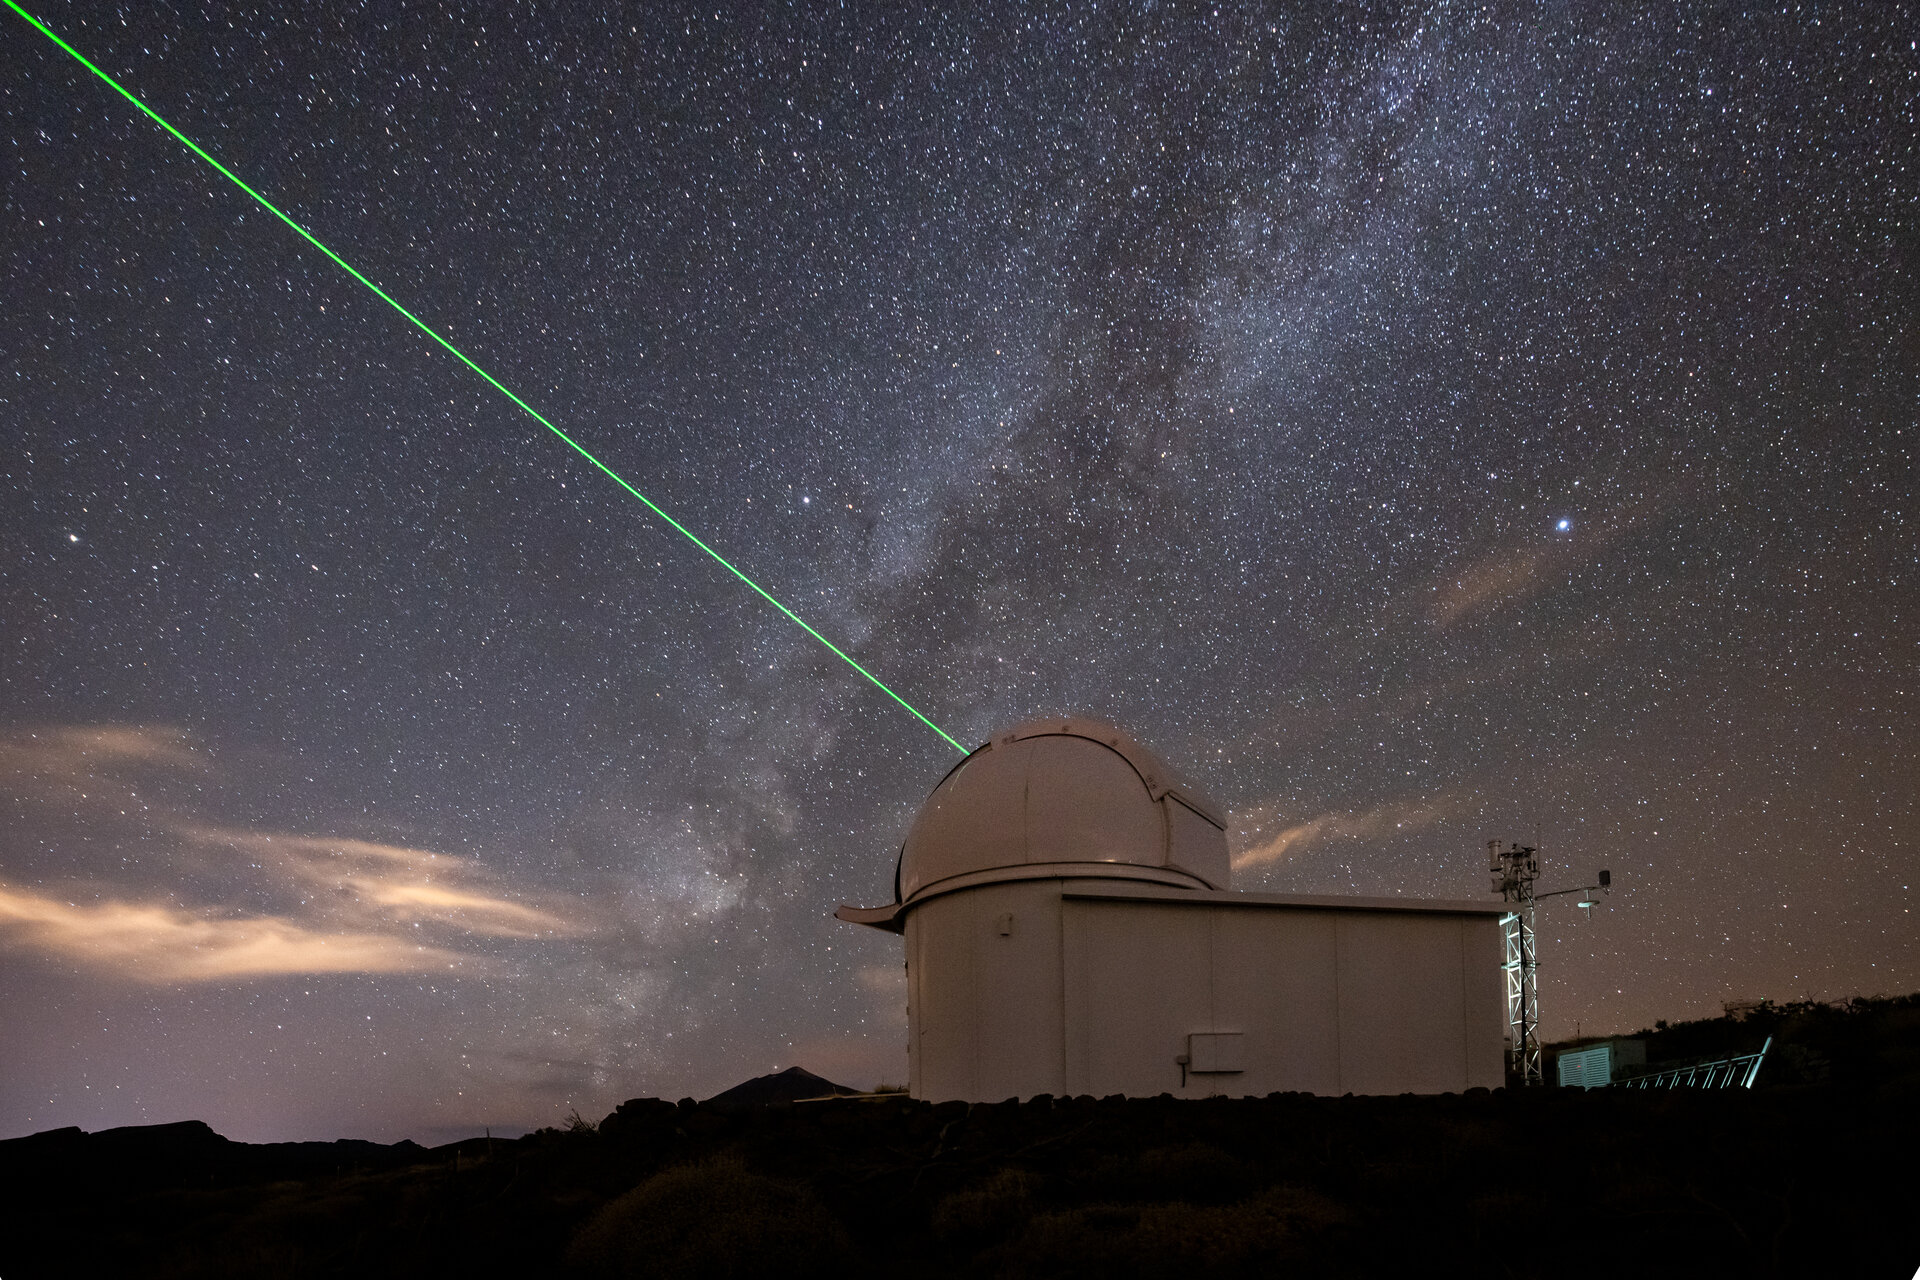 ESA's laser ranging station in Tenerife aims its green laser to the sky